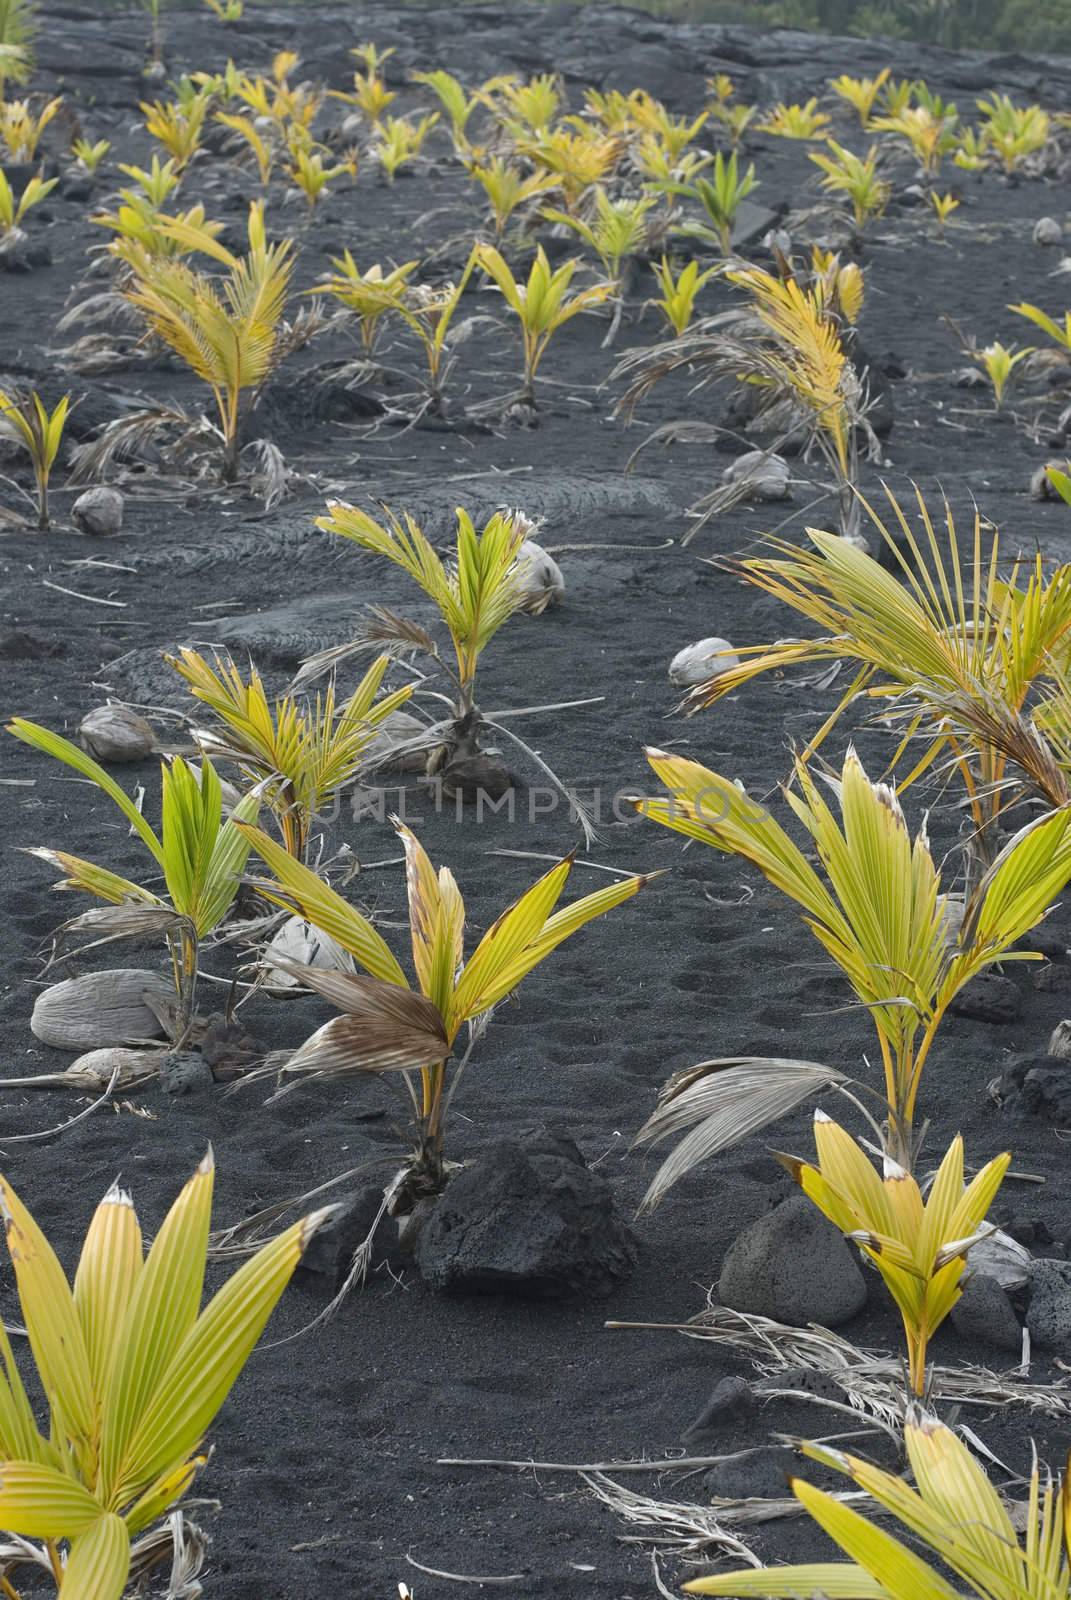 Coconuts sprouting in the dark volcanic soil of Hawaii's Big Island